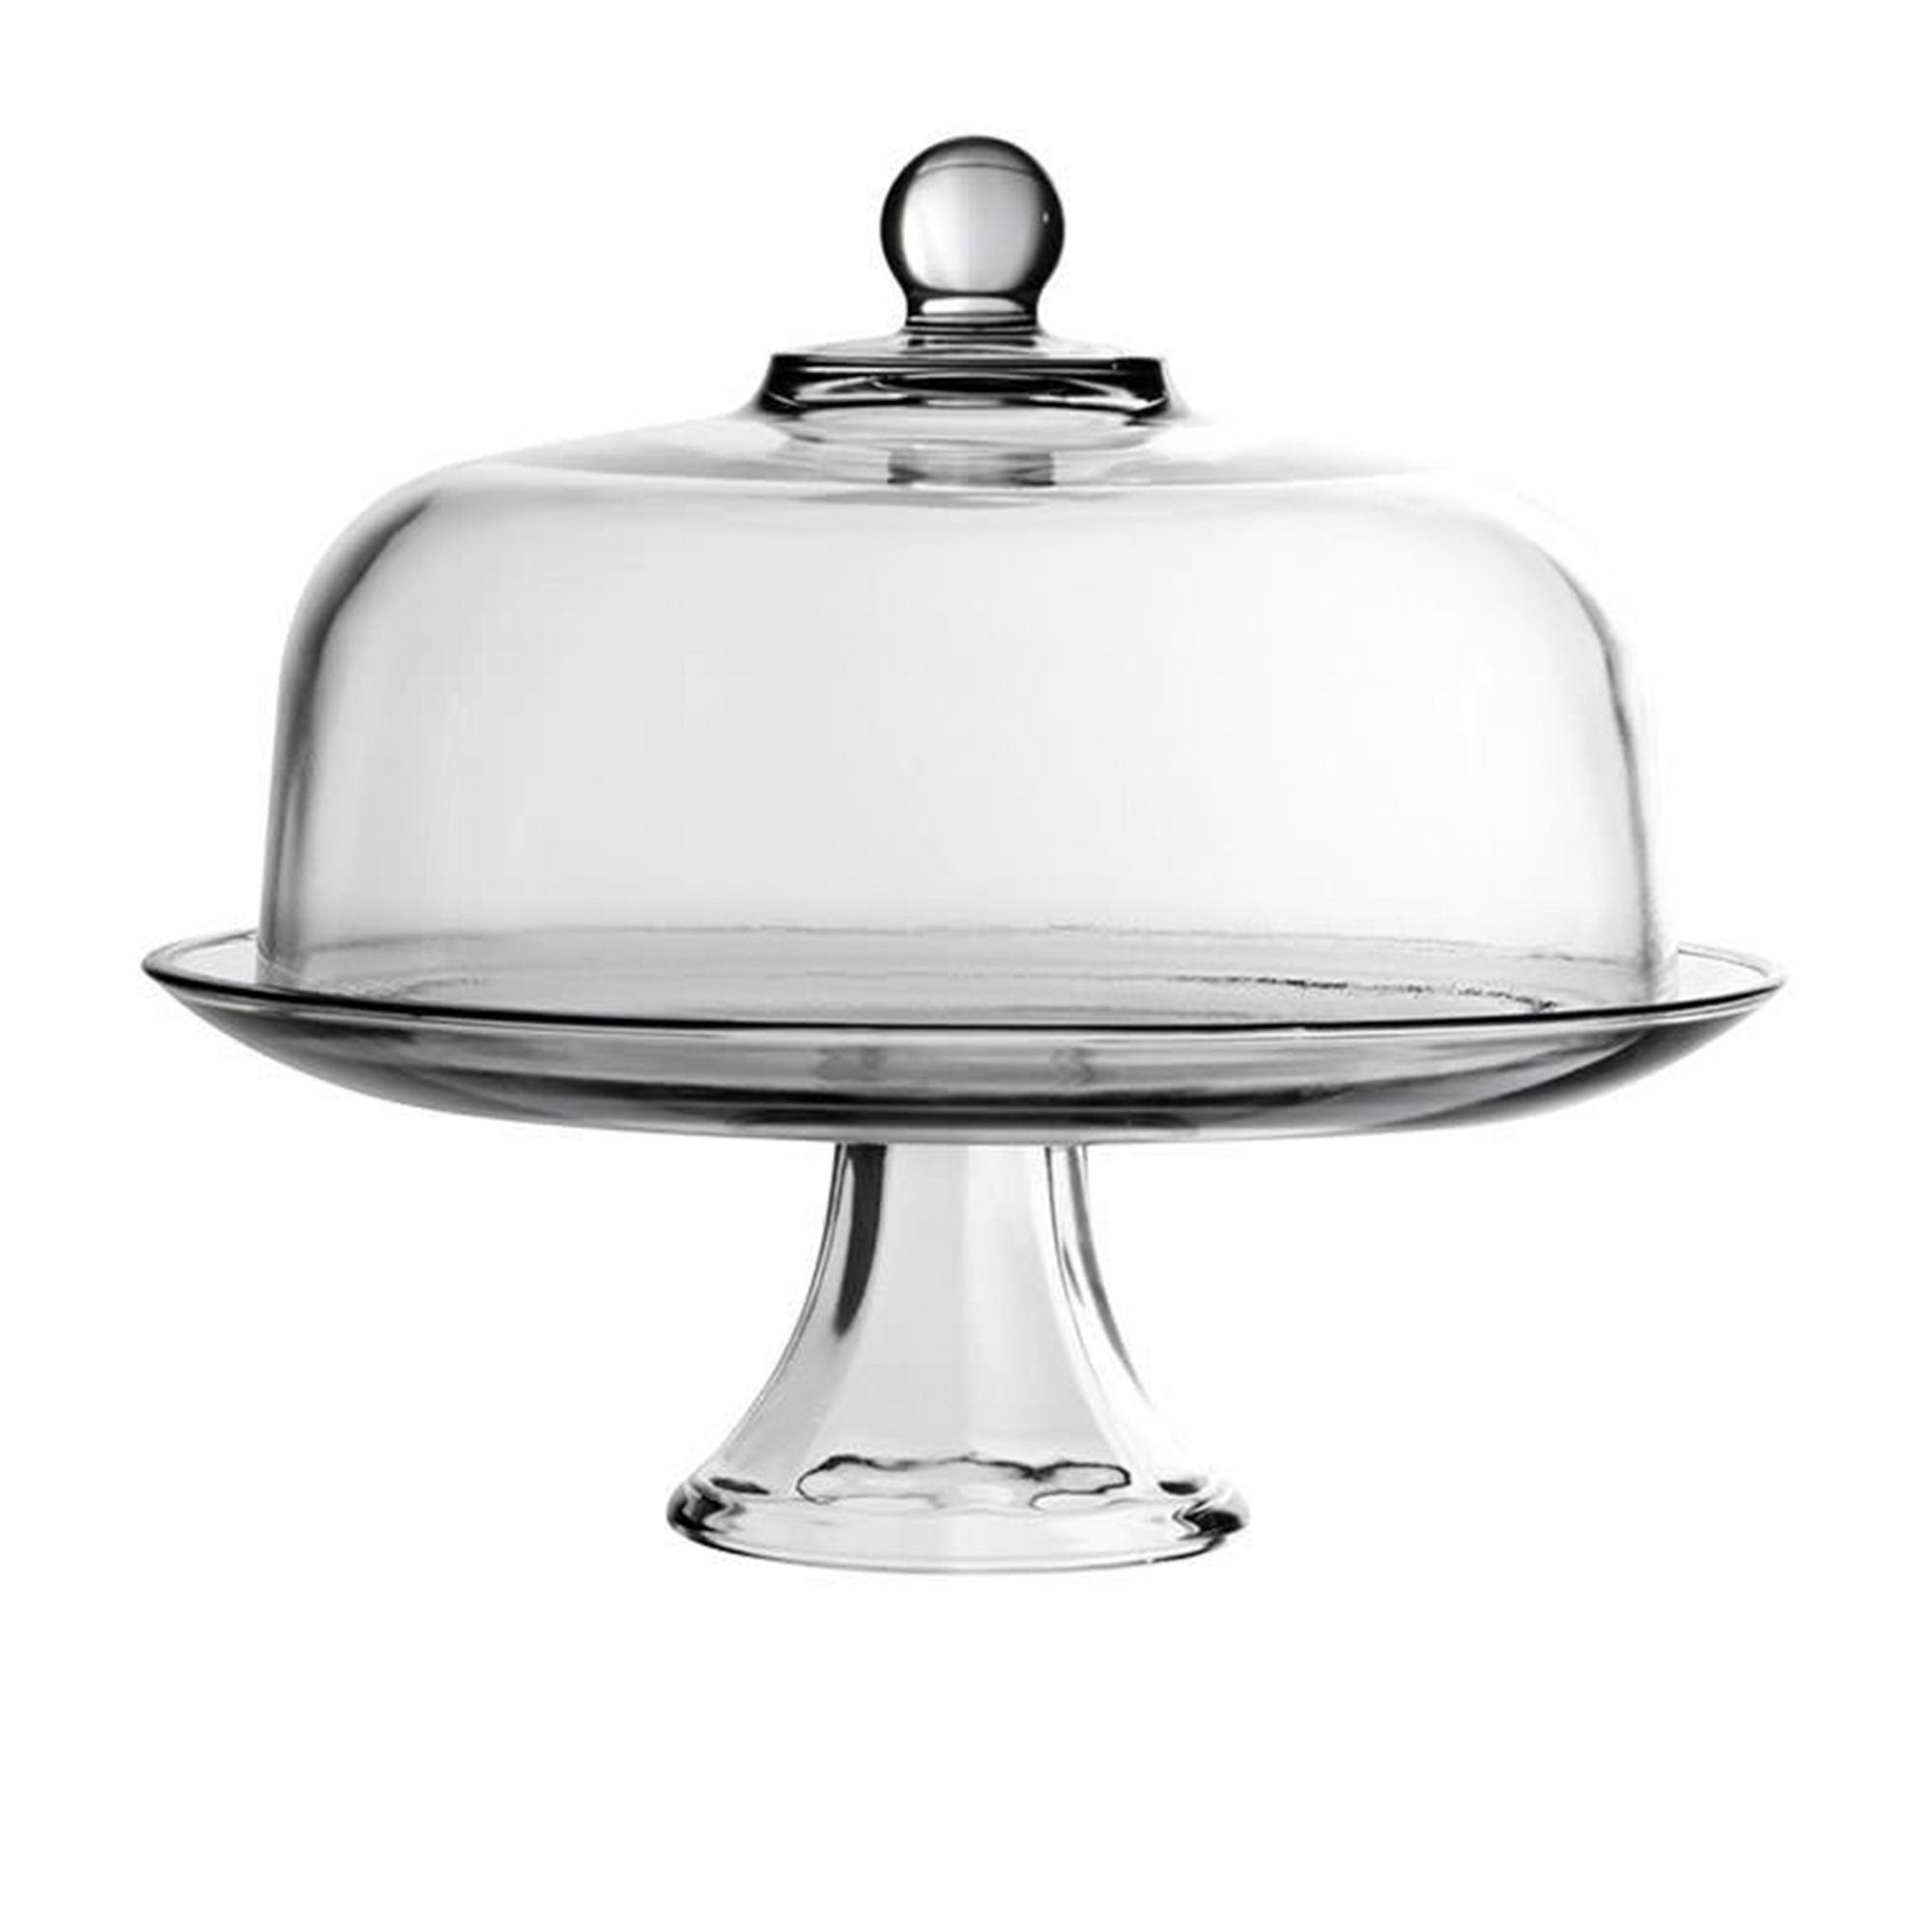 Anchor Hocking Presence Cake Stand & Dome 33cm Image 1